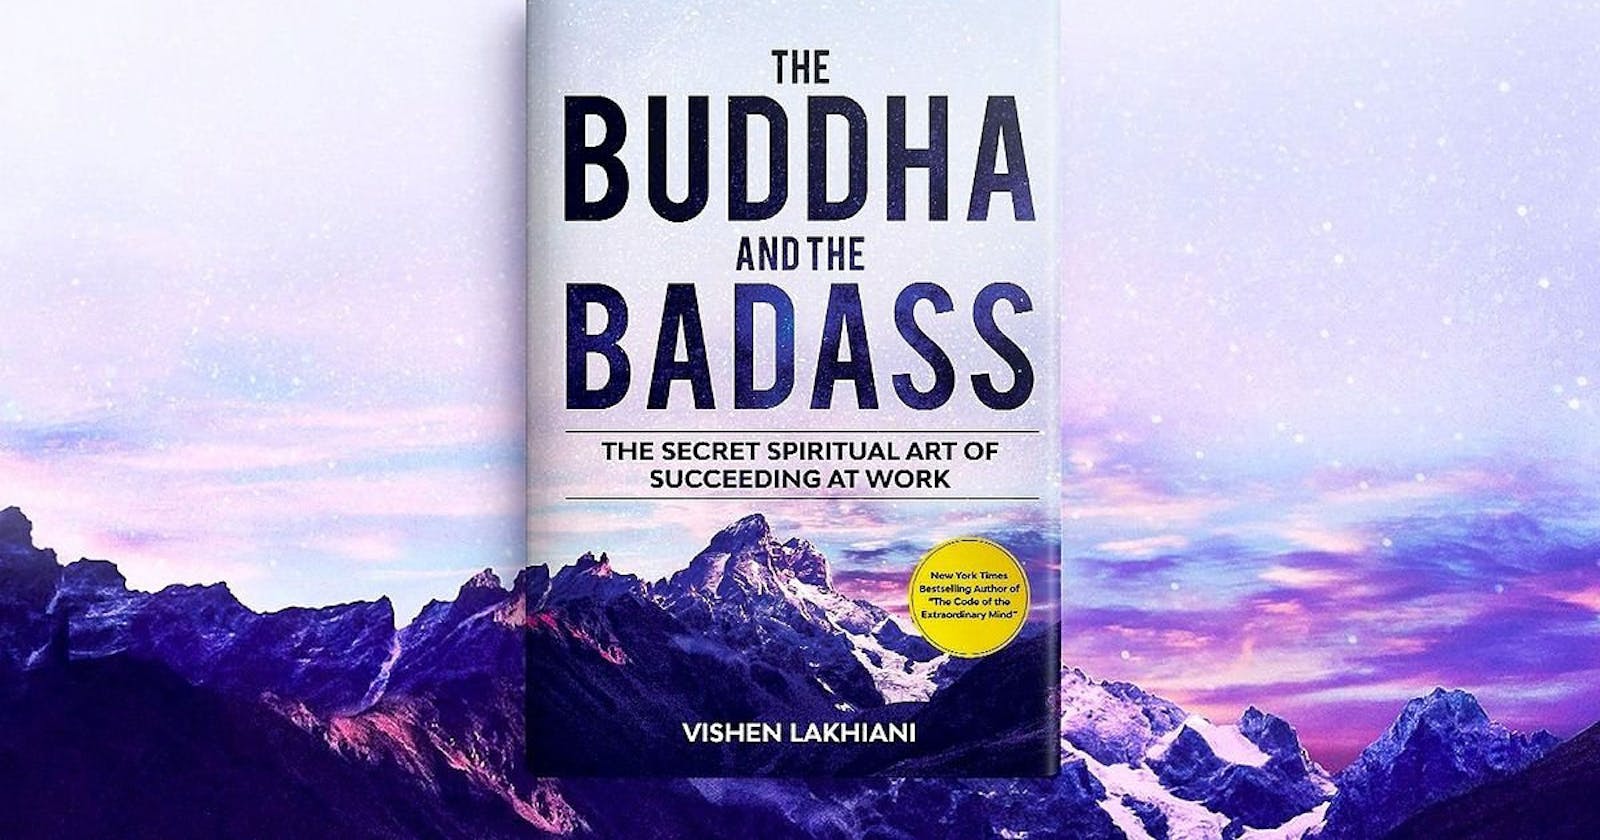 Review: The Buddha and the Badass by Vishen